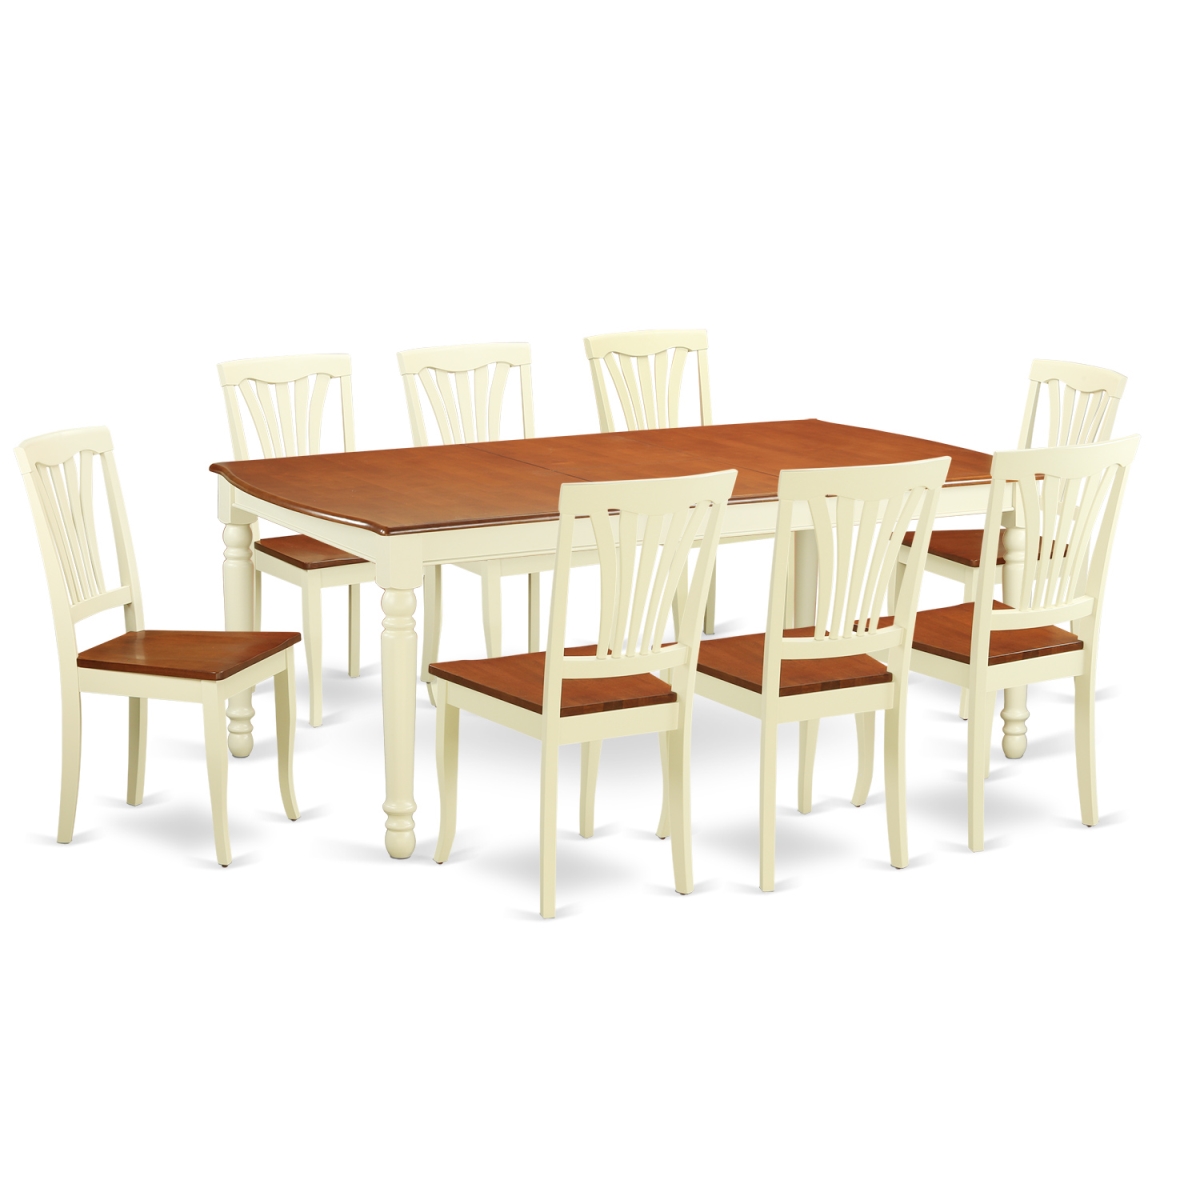 Picture of East West Furniture DOAV9-WHI-W Dining Room Table Set - Dining Room Table & 8 Chairs, Buttermilk & Cherry - 9 Piece